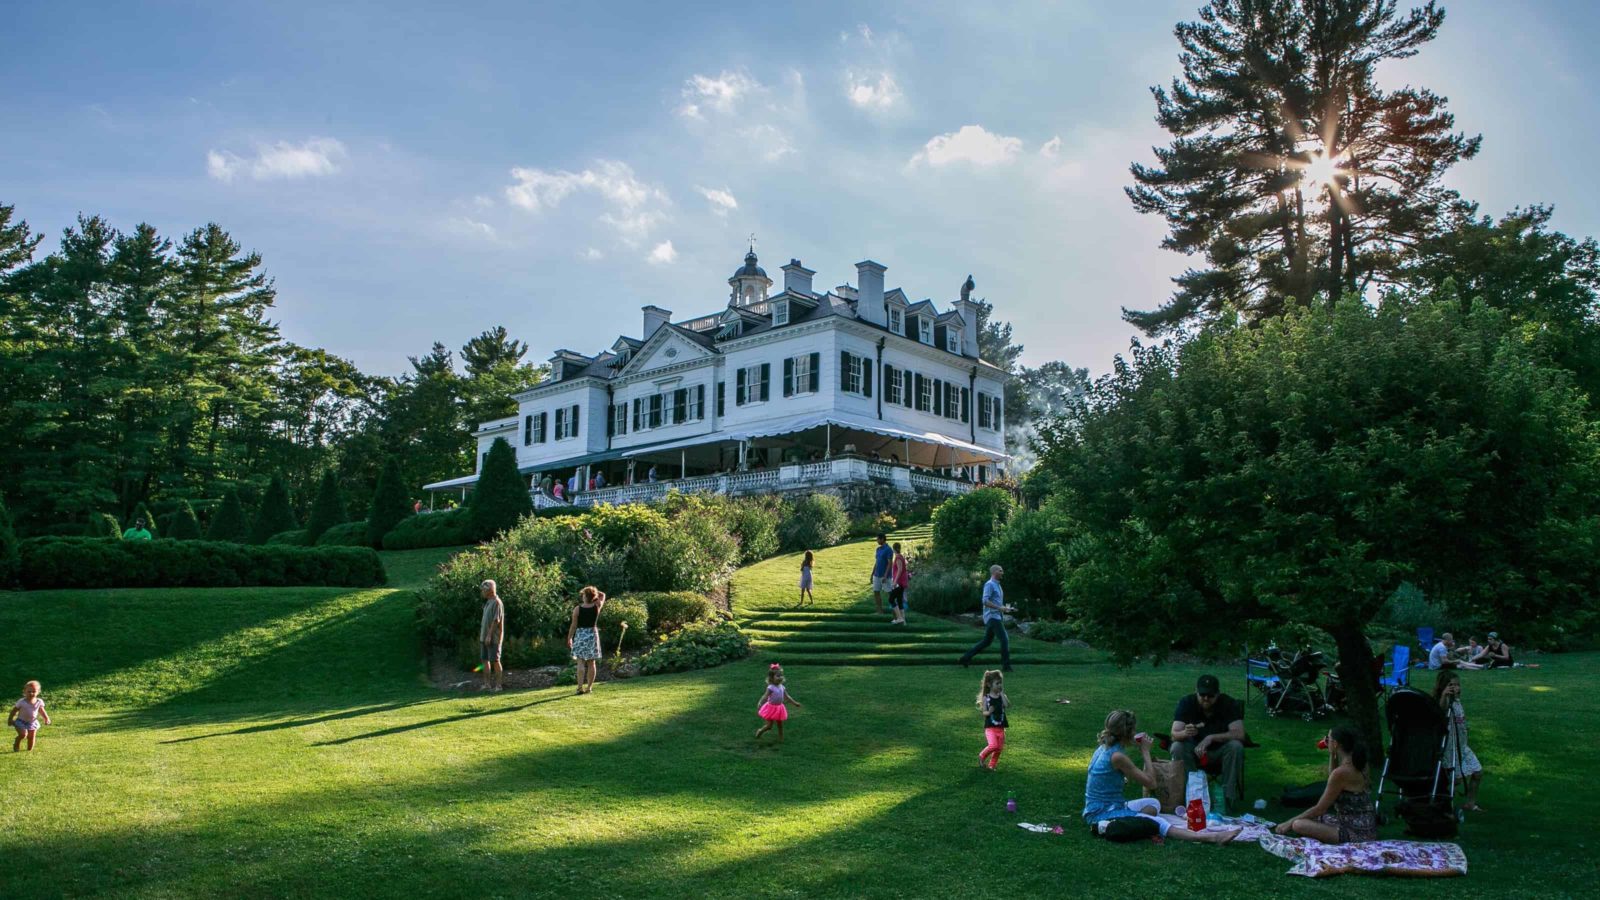 Families picnic on the lawn on a summer evening at the Mount, Edith Wharton's historic house in Lenox.